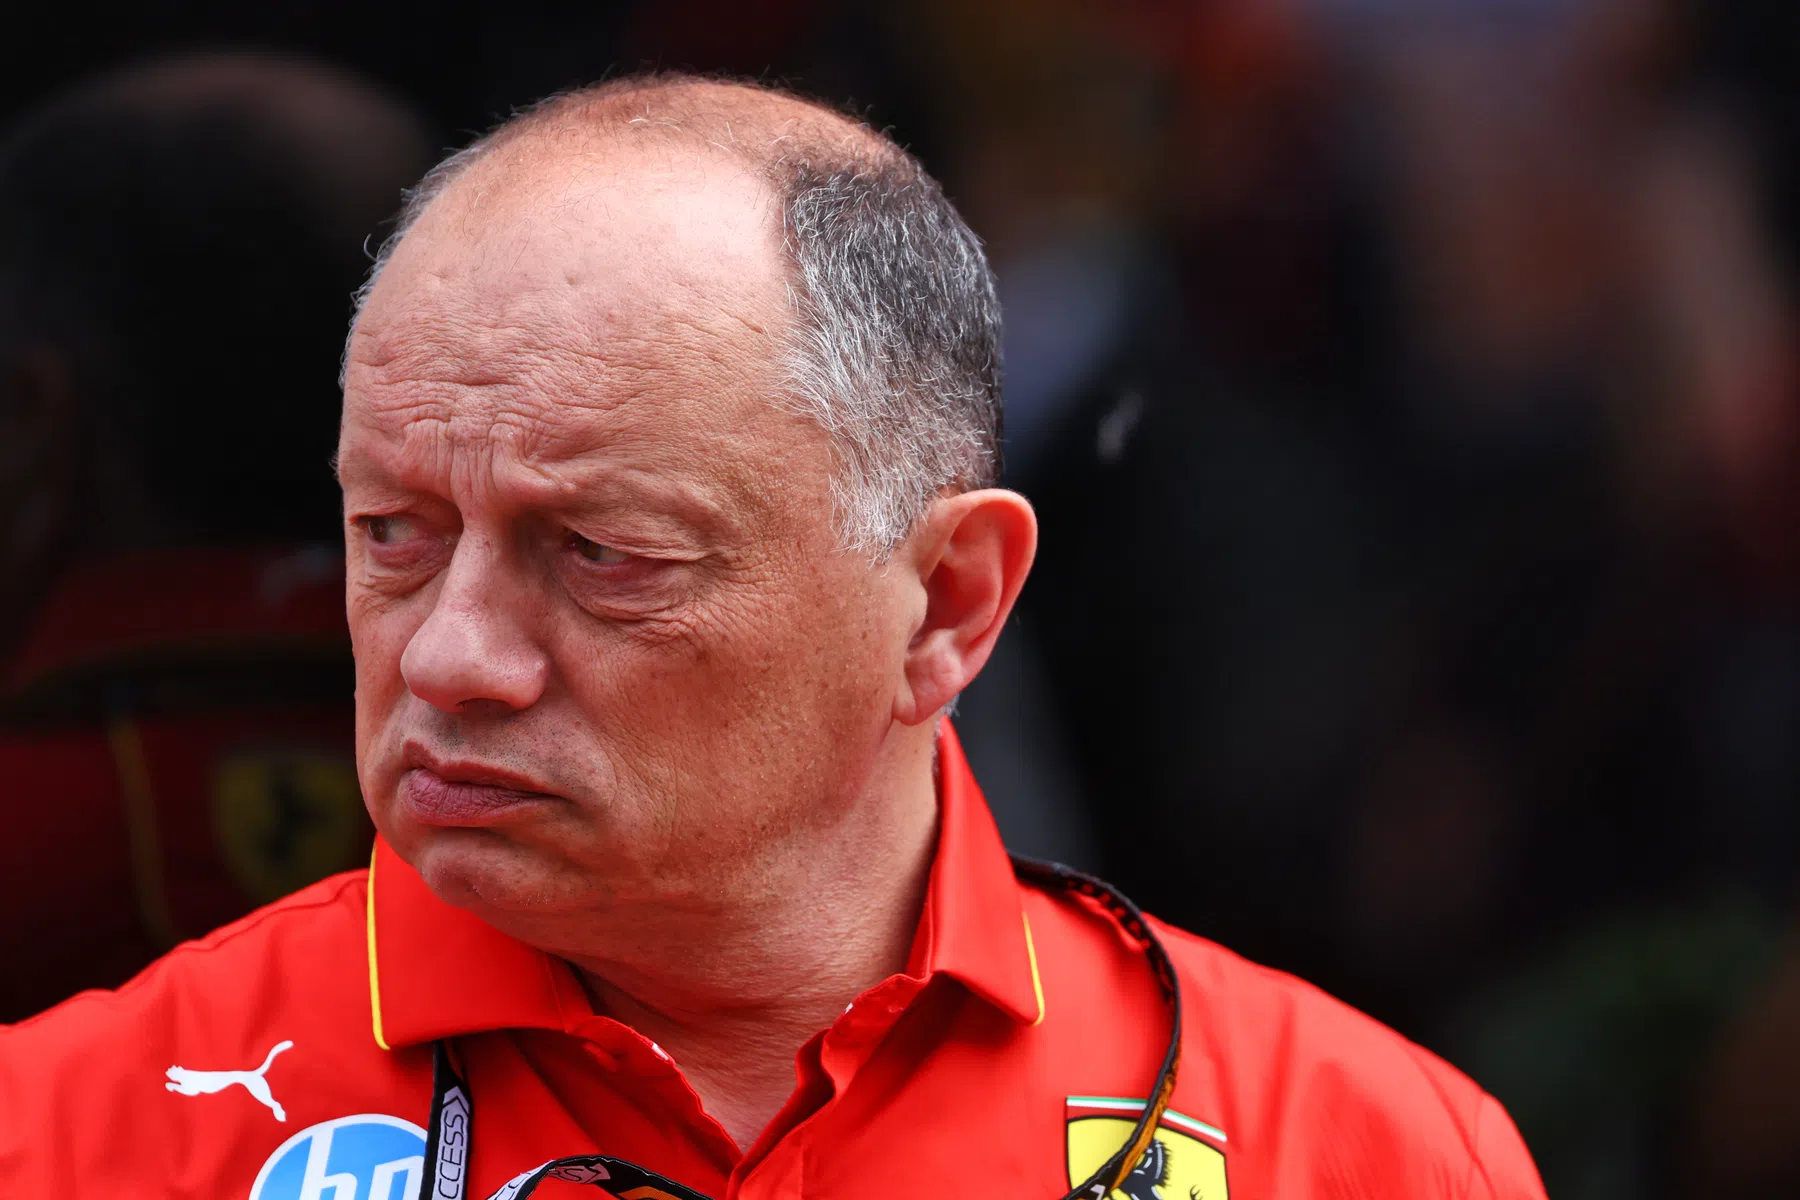 Ferrari team principal Fred Vasseur on threat from McLaren and mistakes 